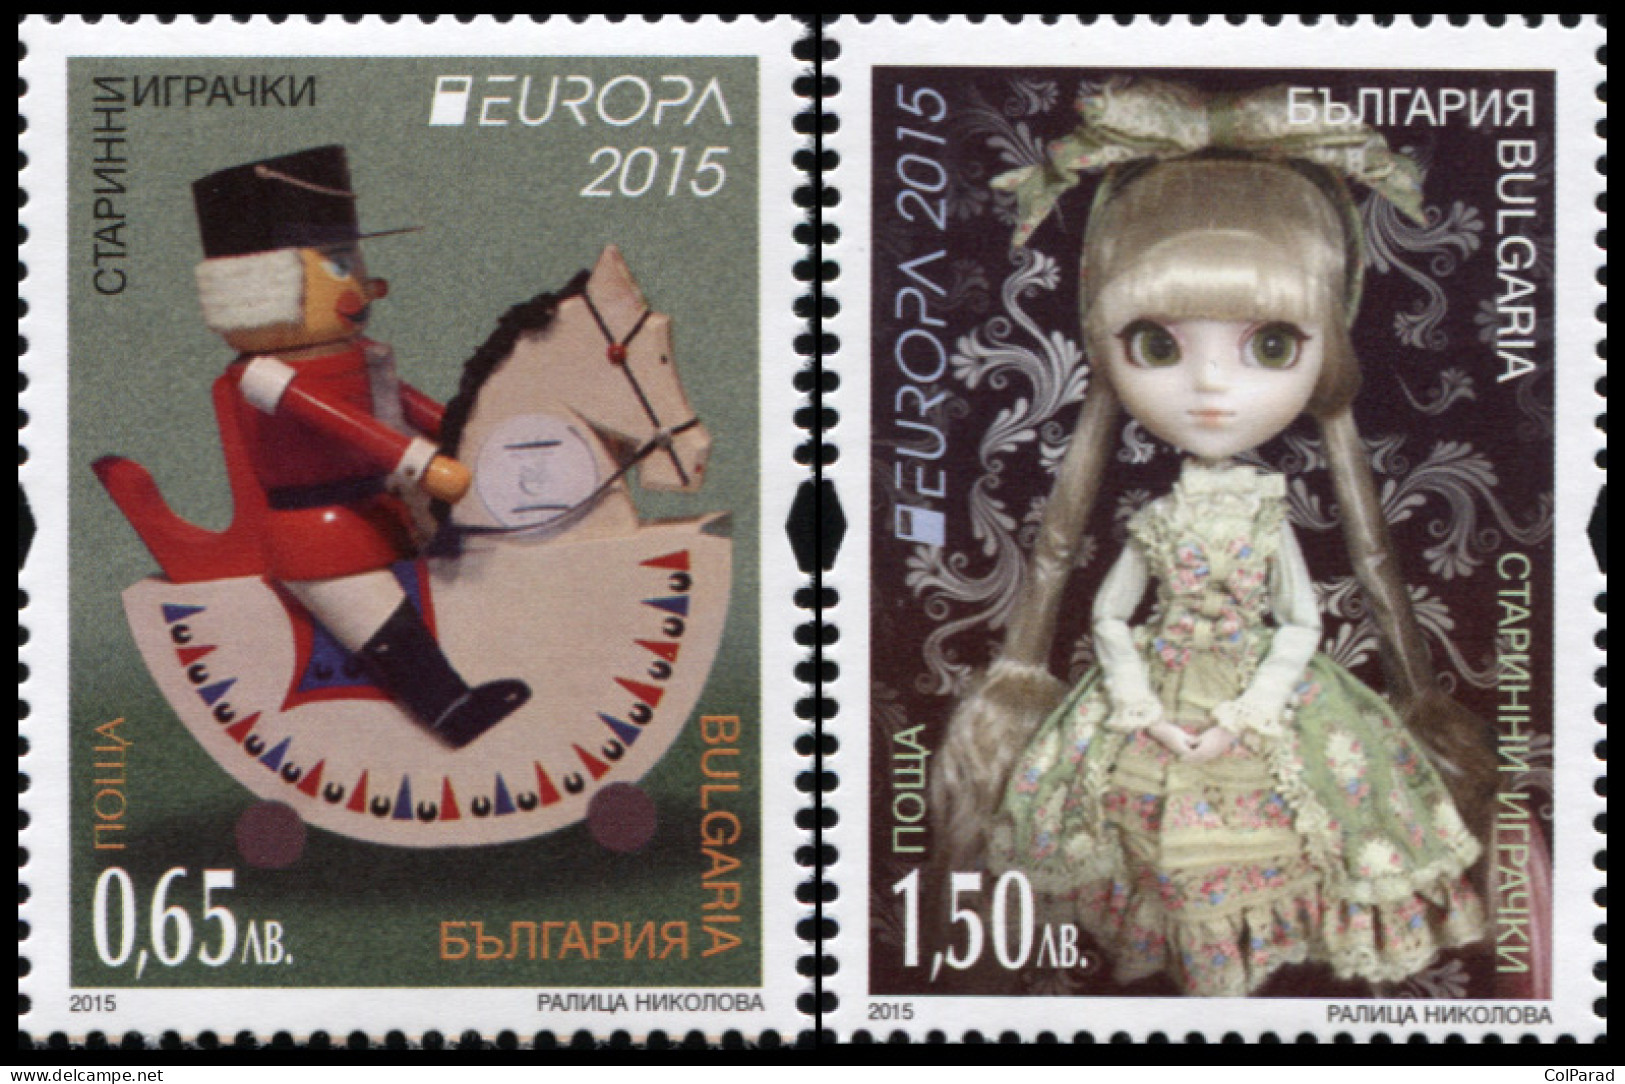 BULGARIA - 2015 - SET OF 2 STAMPS MNH ** - Old Toys - Nuovi